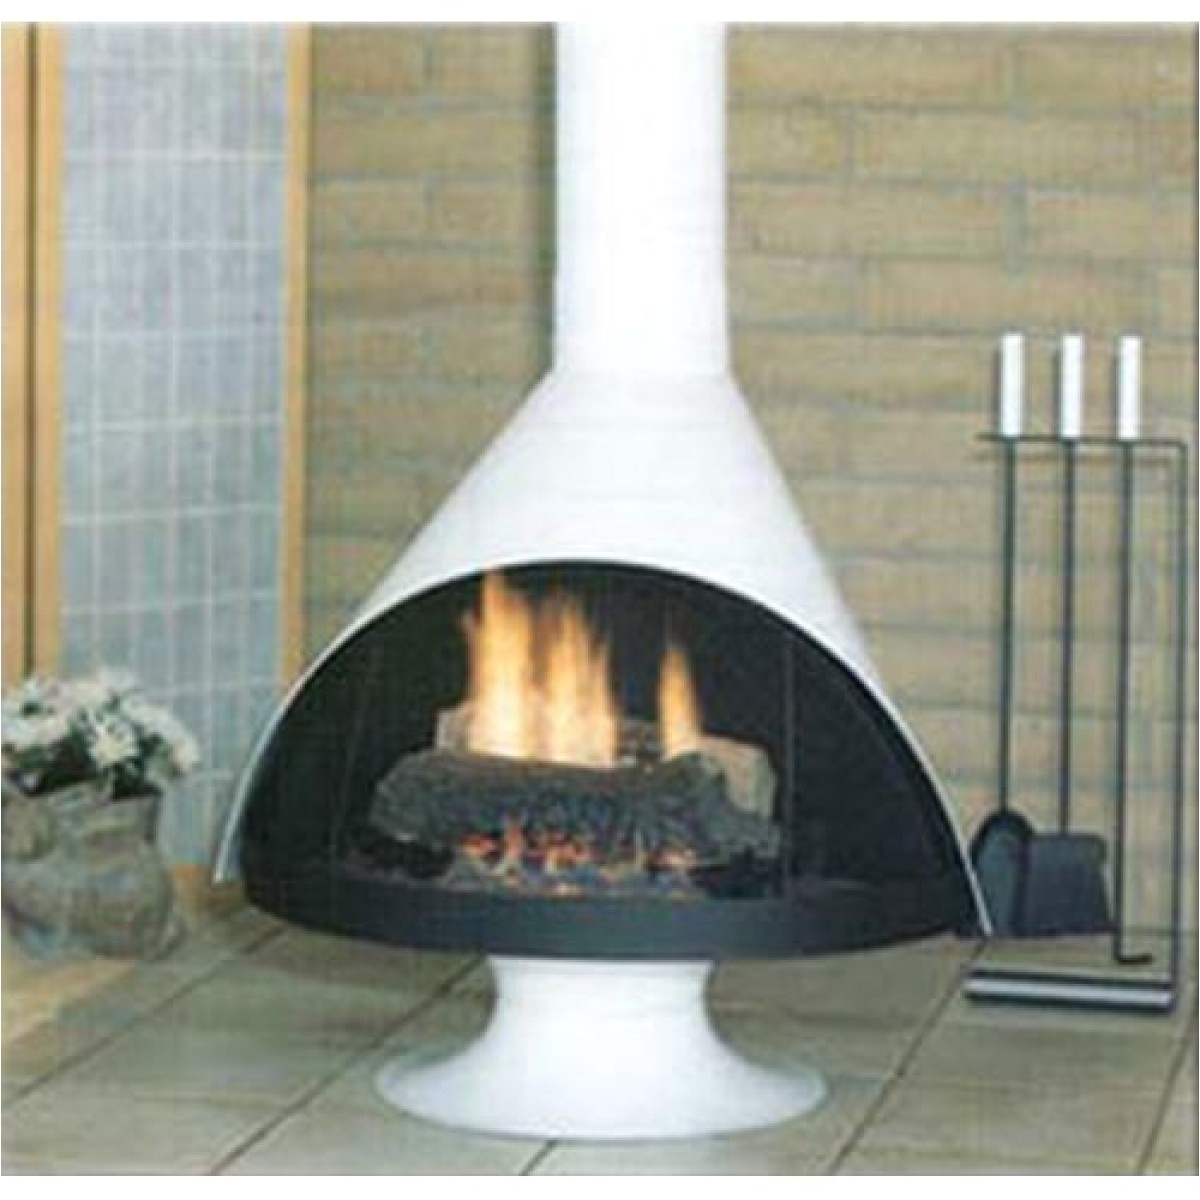 malm zircon 34 inch wood burning or gas fireplace in matte black or porcelain colors